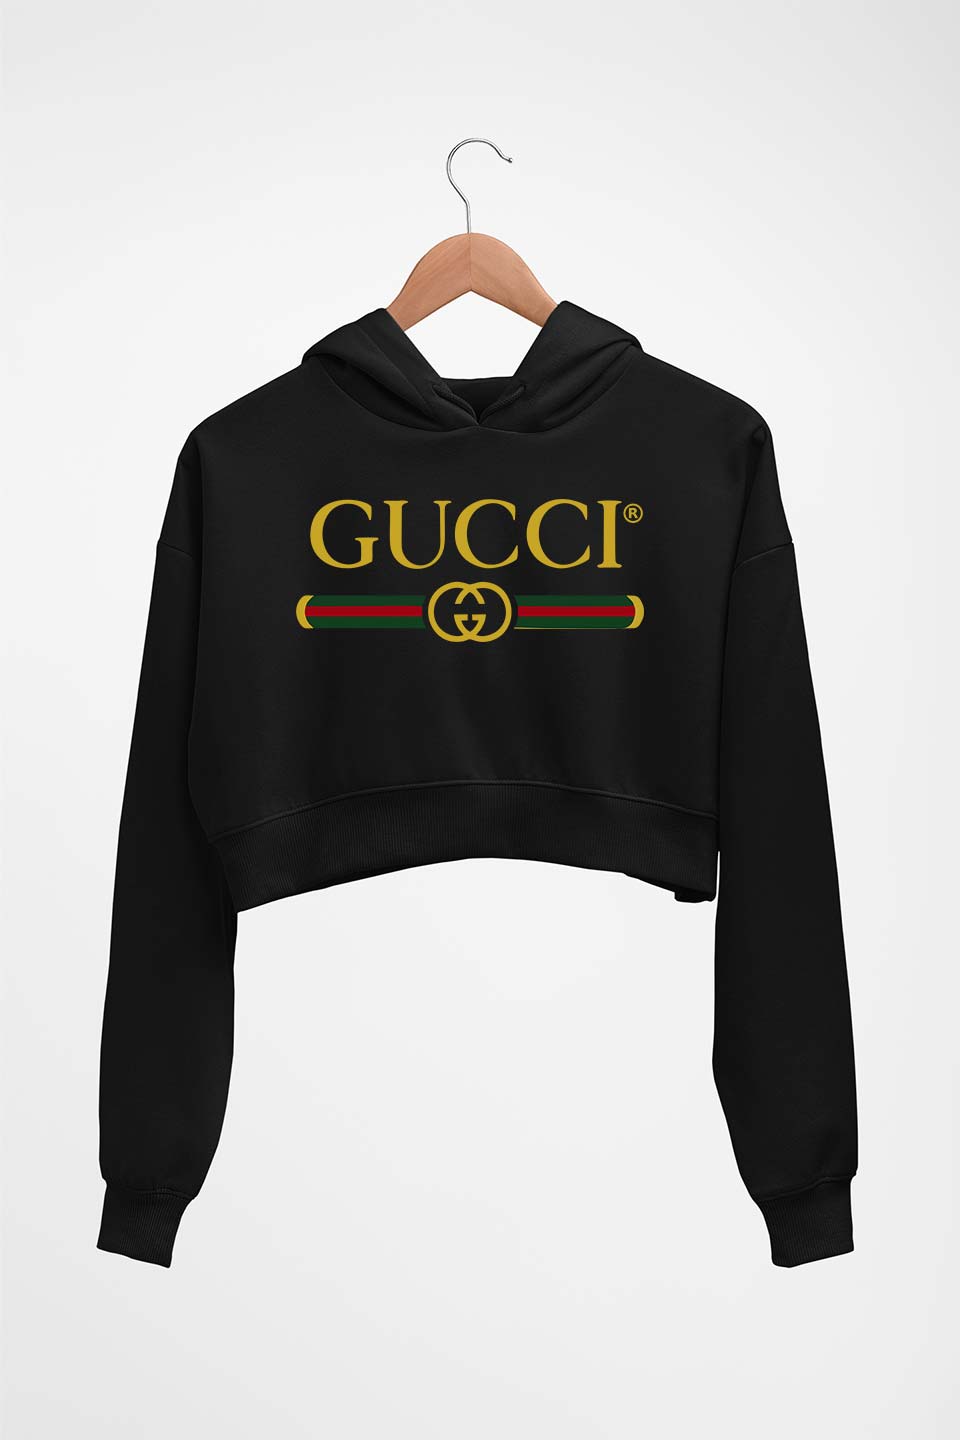 gucci cropped hoodie